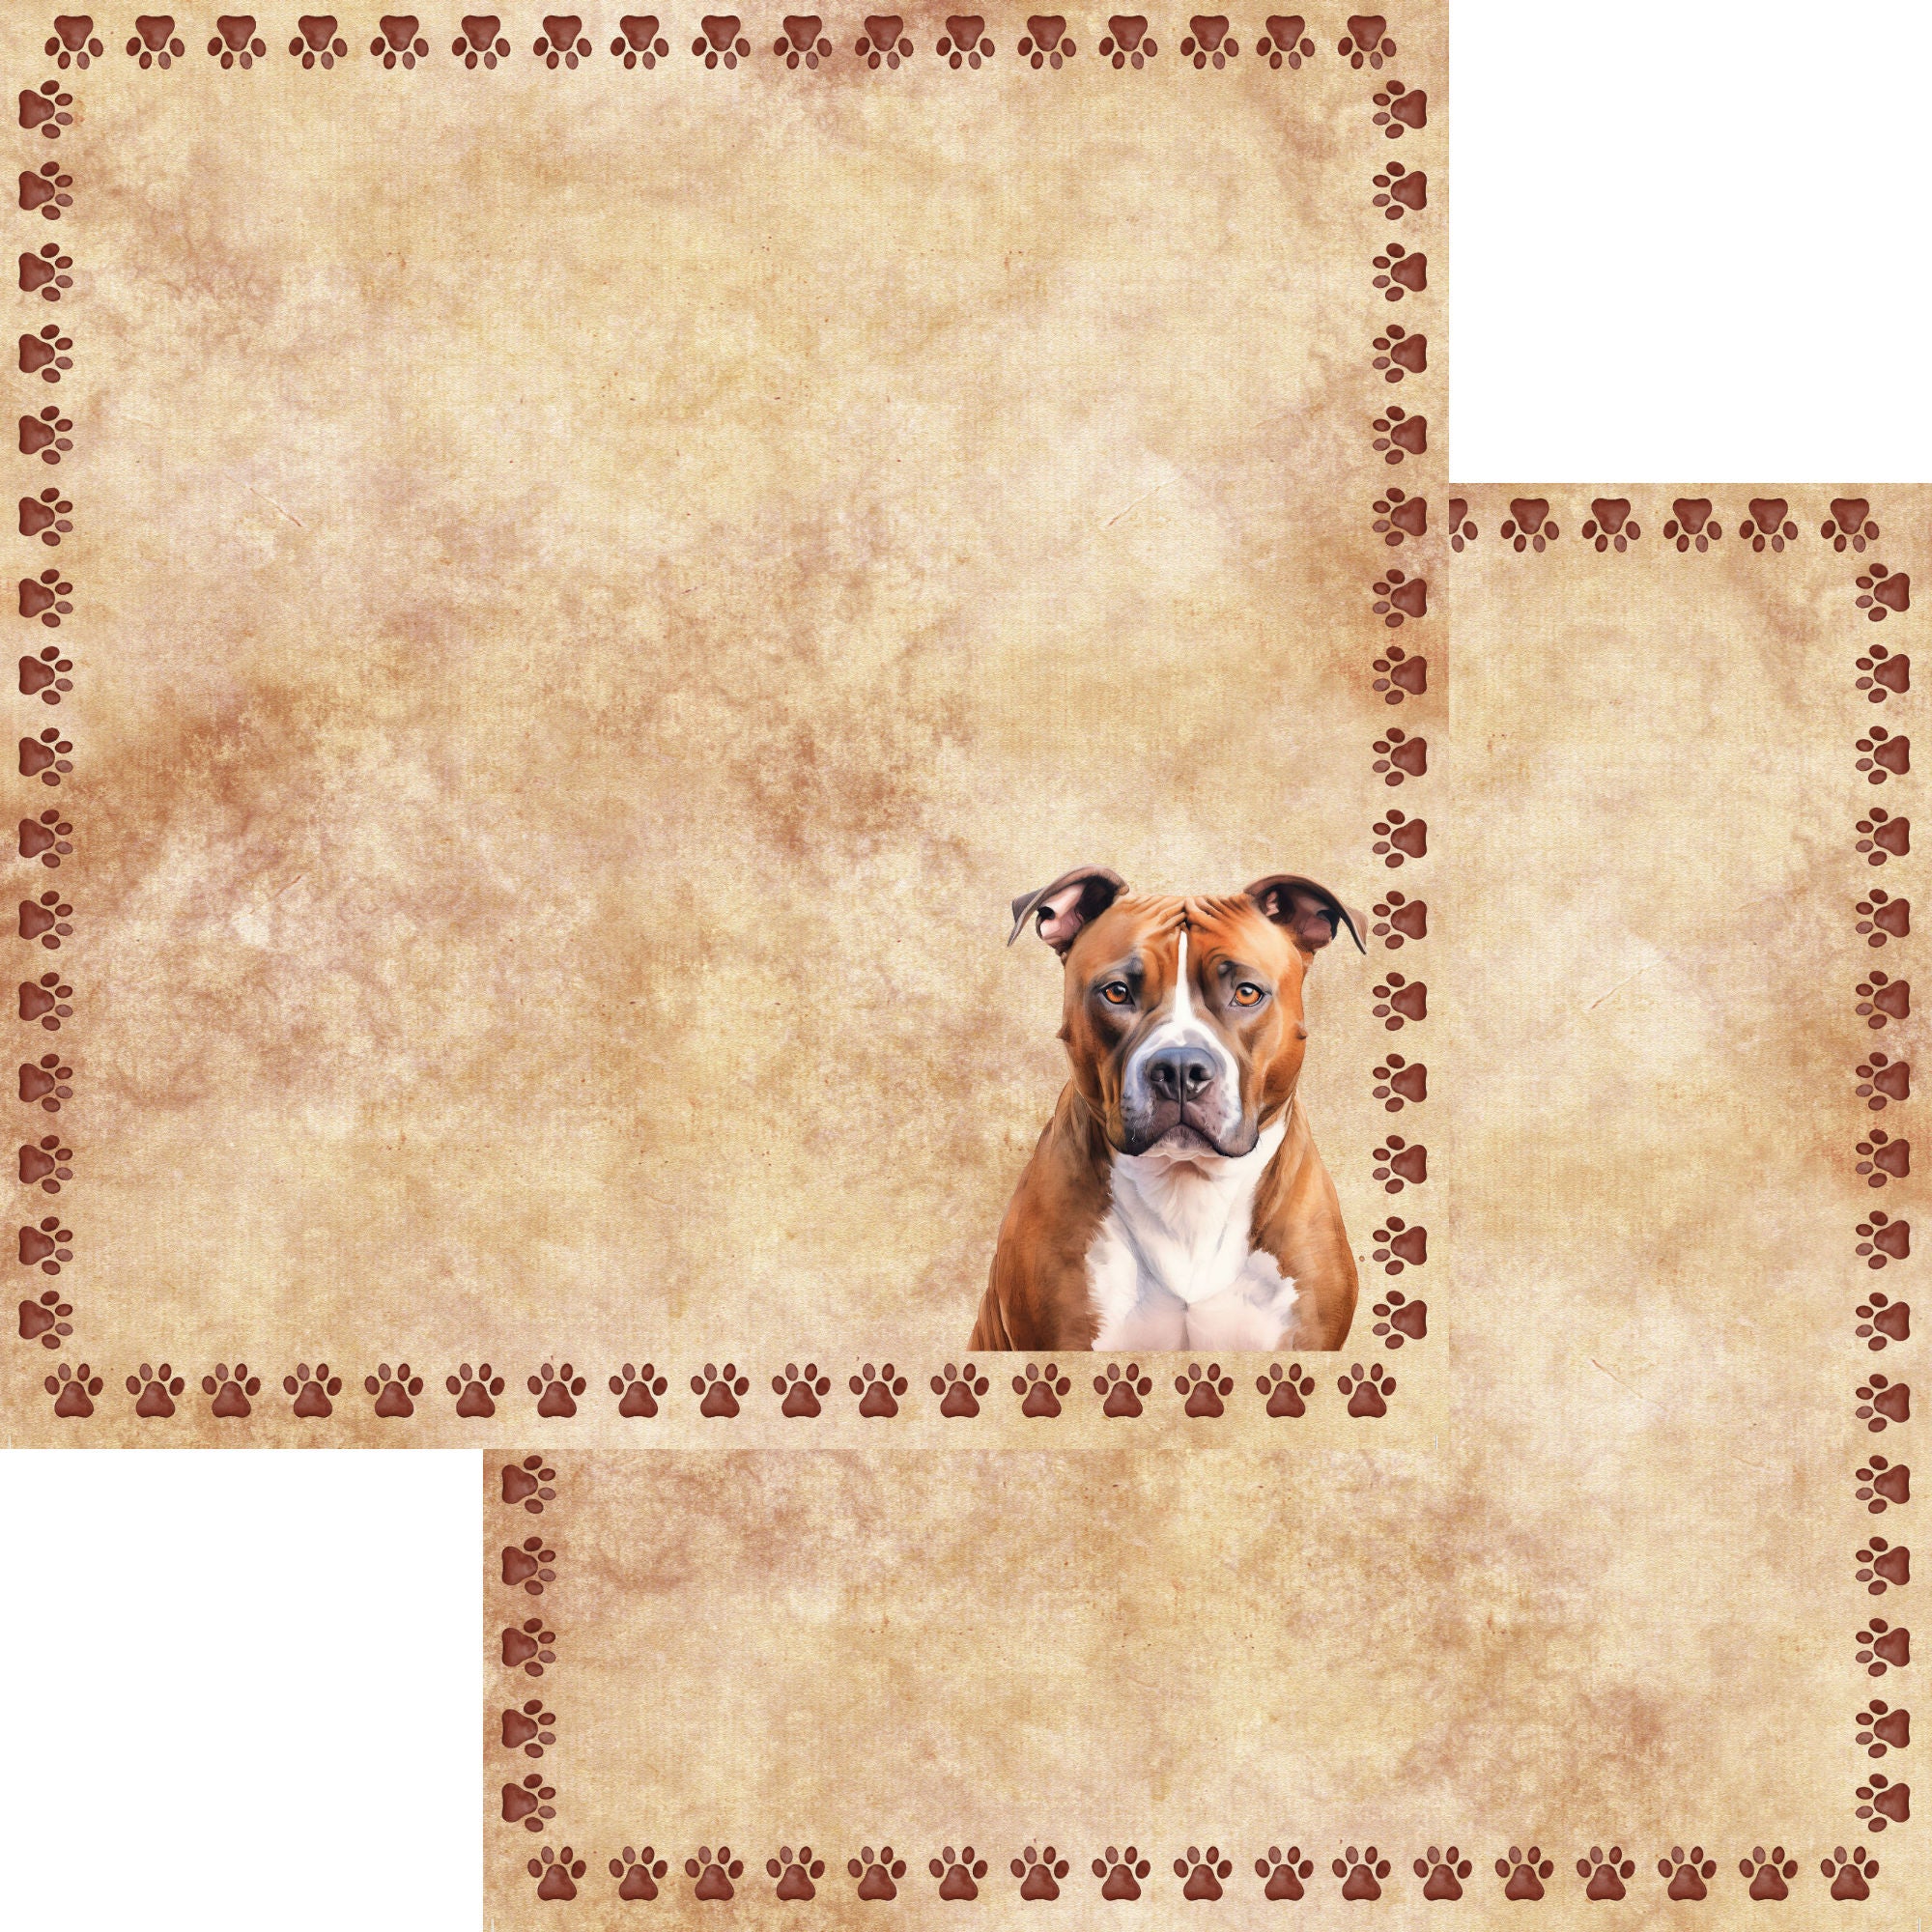 Dog Breeds Collection Pitbull 12 x 12 Double-Sided Scrapbook Paper by SSC Designs